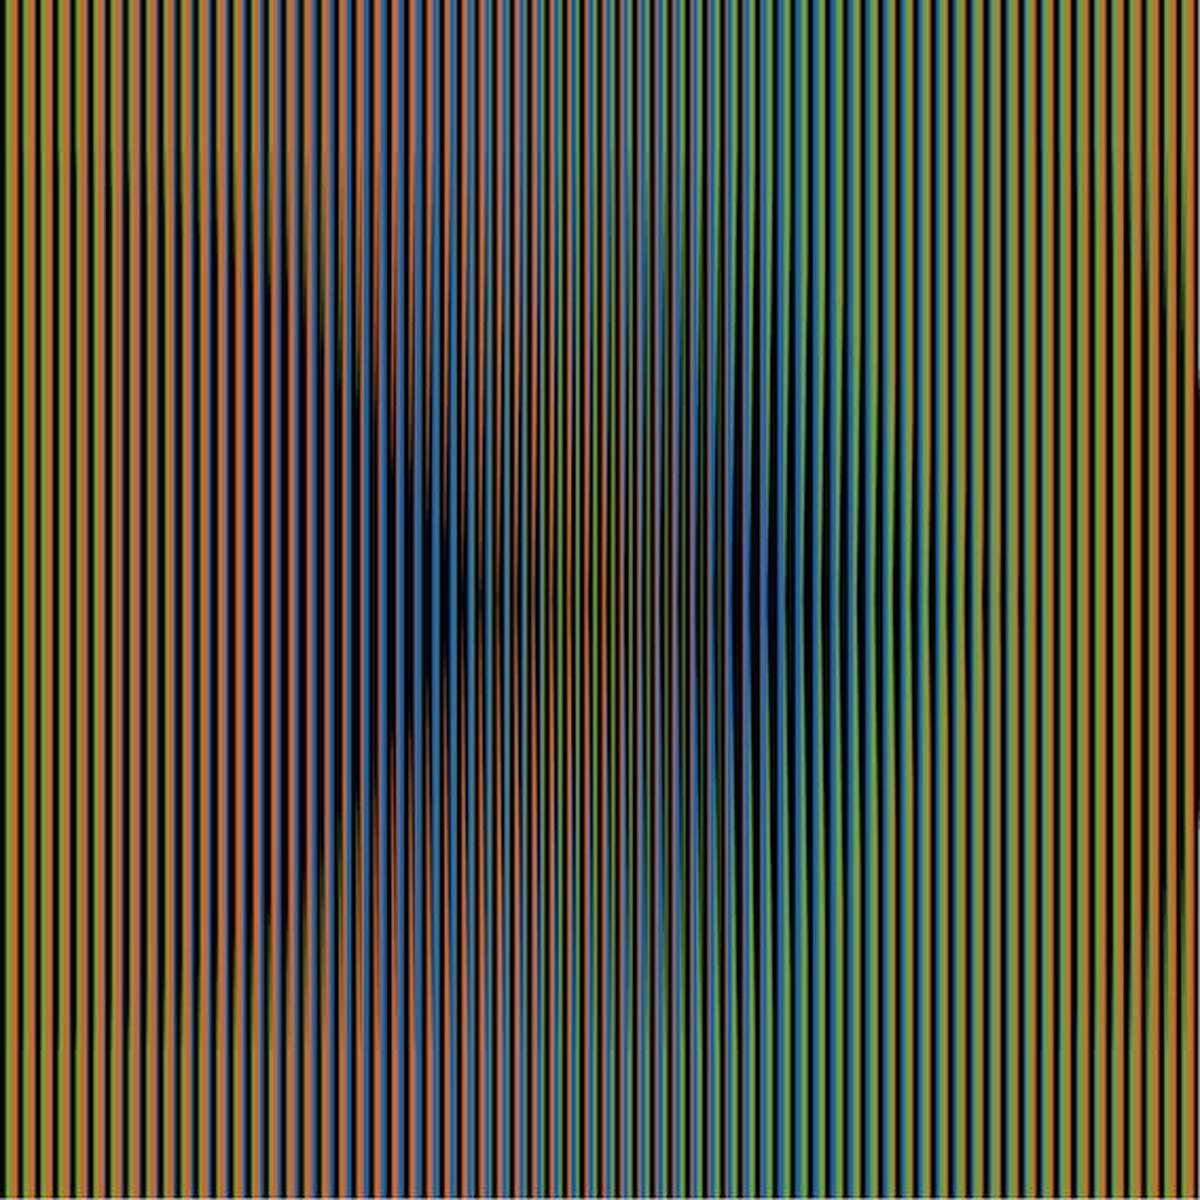 "Induccion Cromatica - Panama" is among the recent works by Carlos Cruz-Diez that change color as your perspective changes. See them at Sicardi Gallery through Nov. 3.